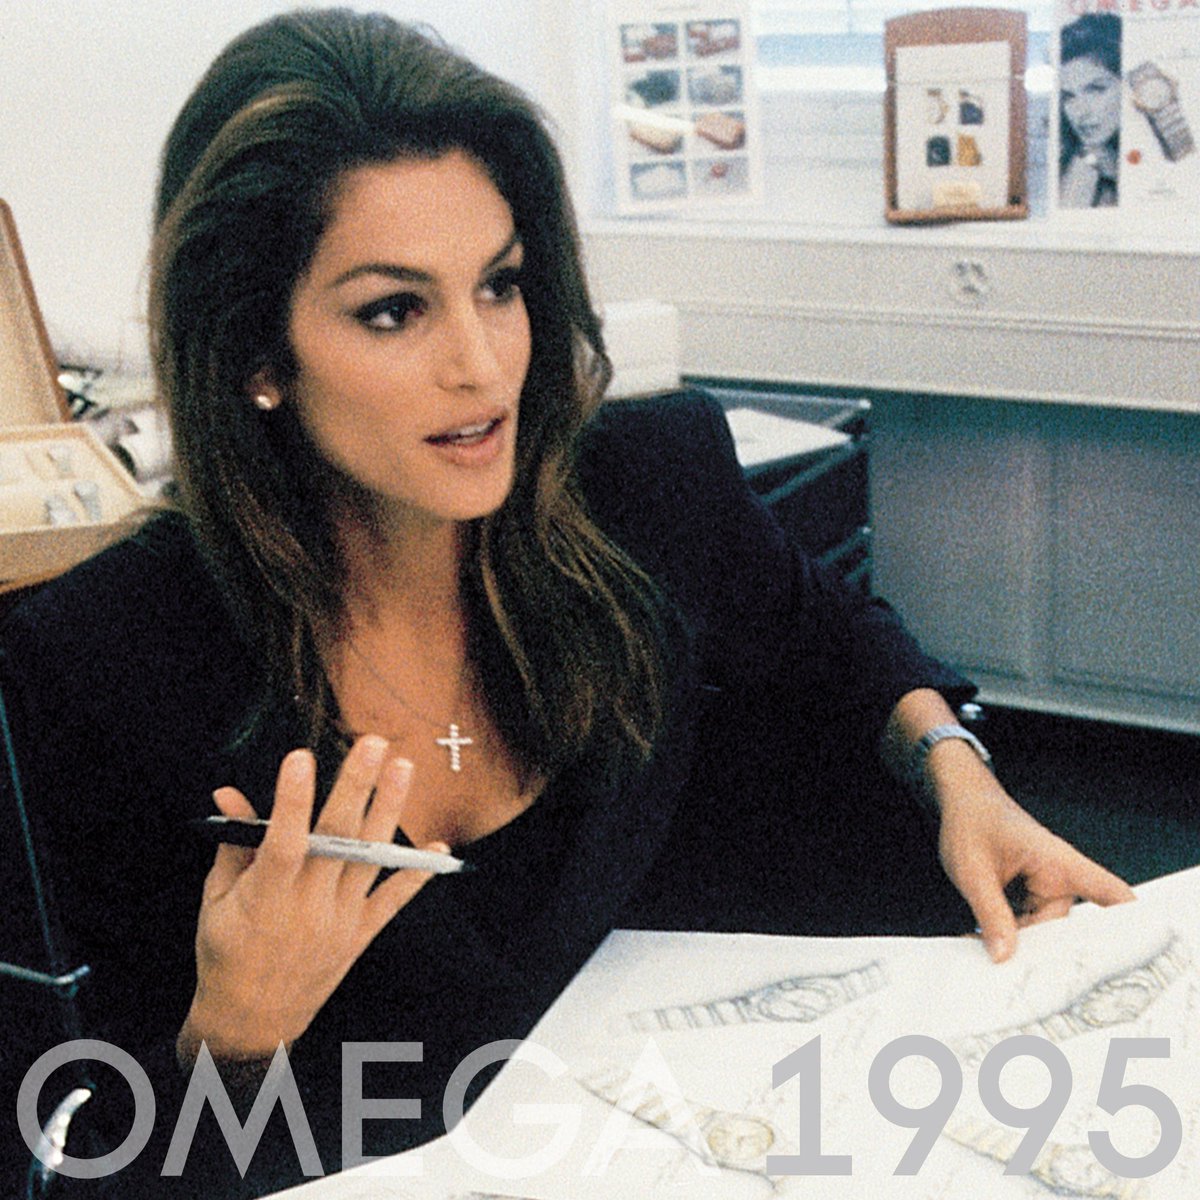 RT @omegawatches: #OmegaChronicle Did you know that @CindyCrawford worked on the design of the Constellation a few years back? https://t.co…